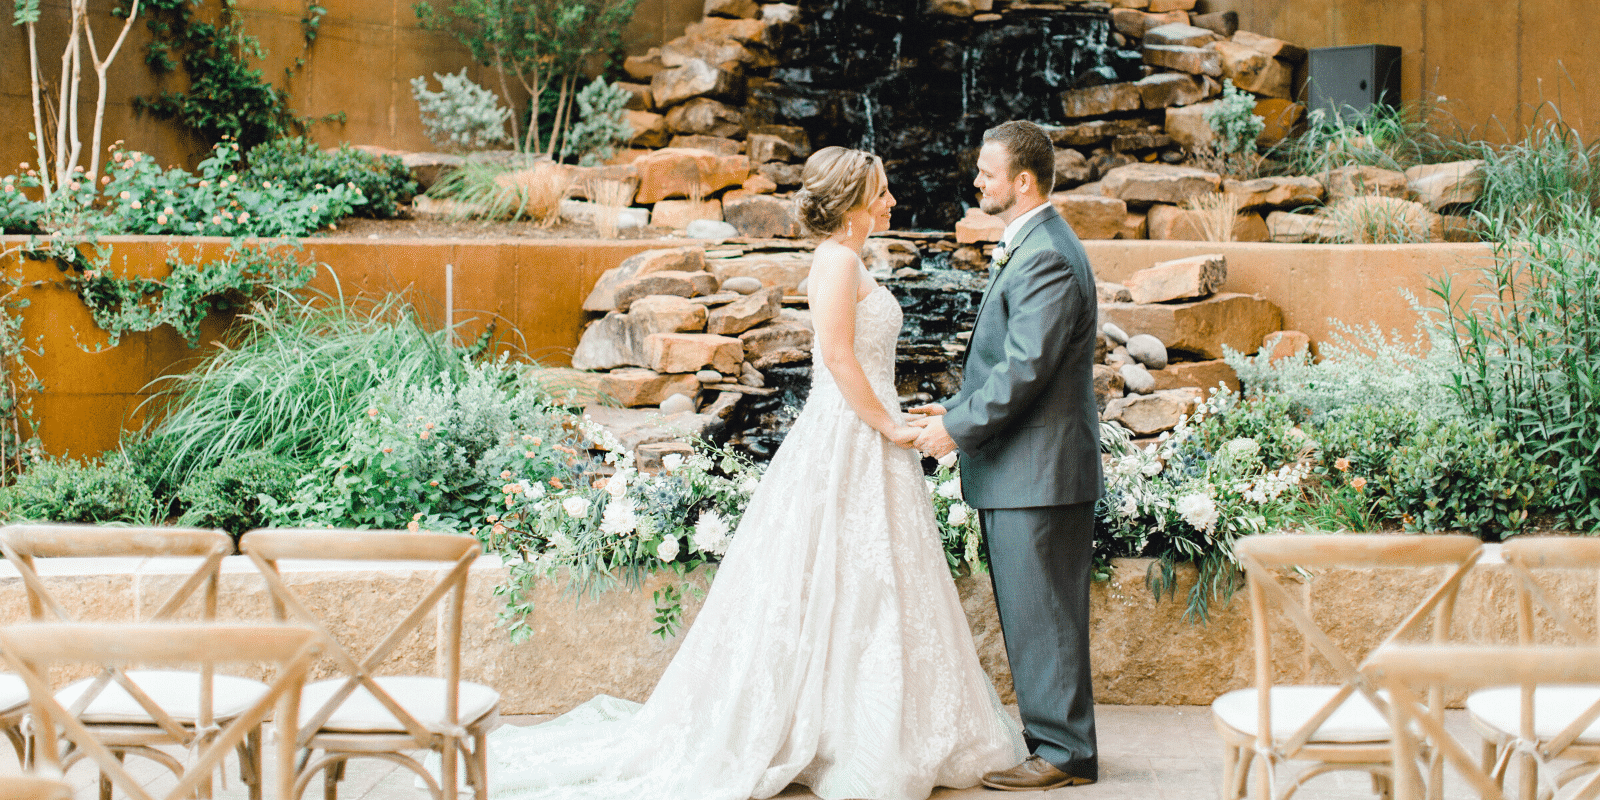 Featured image for “The “I DO” Do over Wedding   |   Lubbock, Texas Weddings”